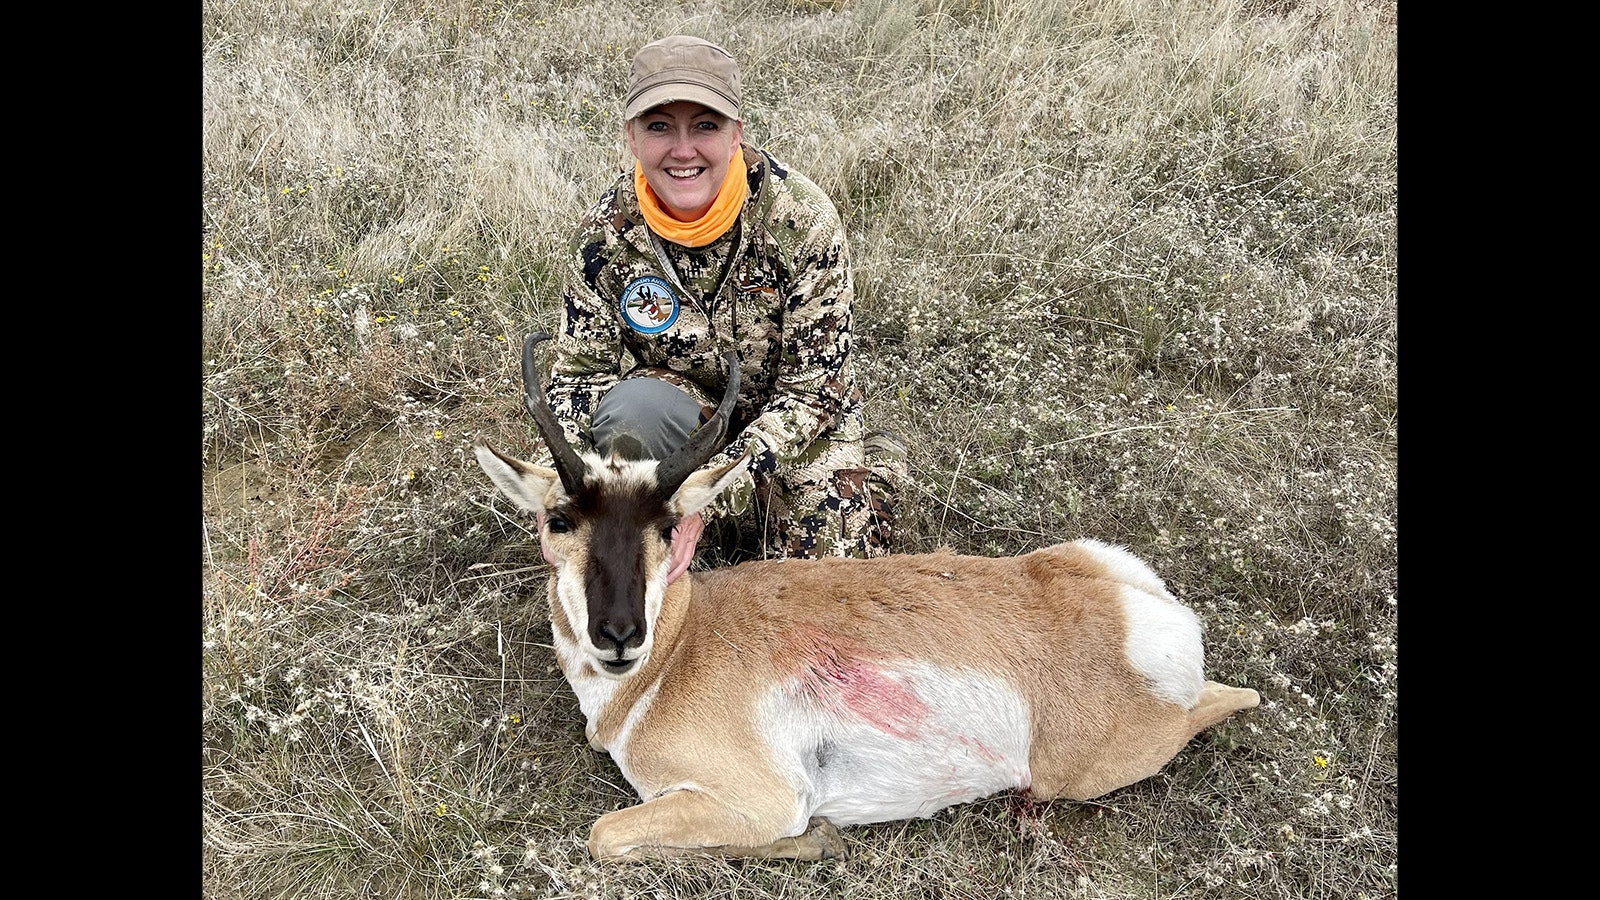 Becky Rodriguez with the pronghorn she bagged.